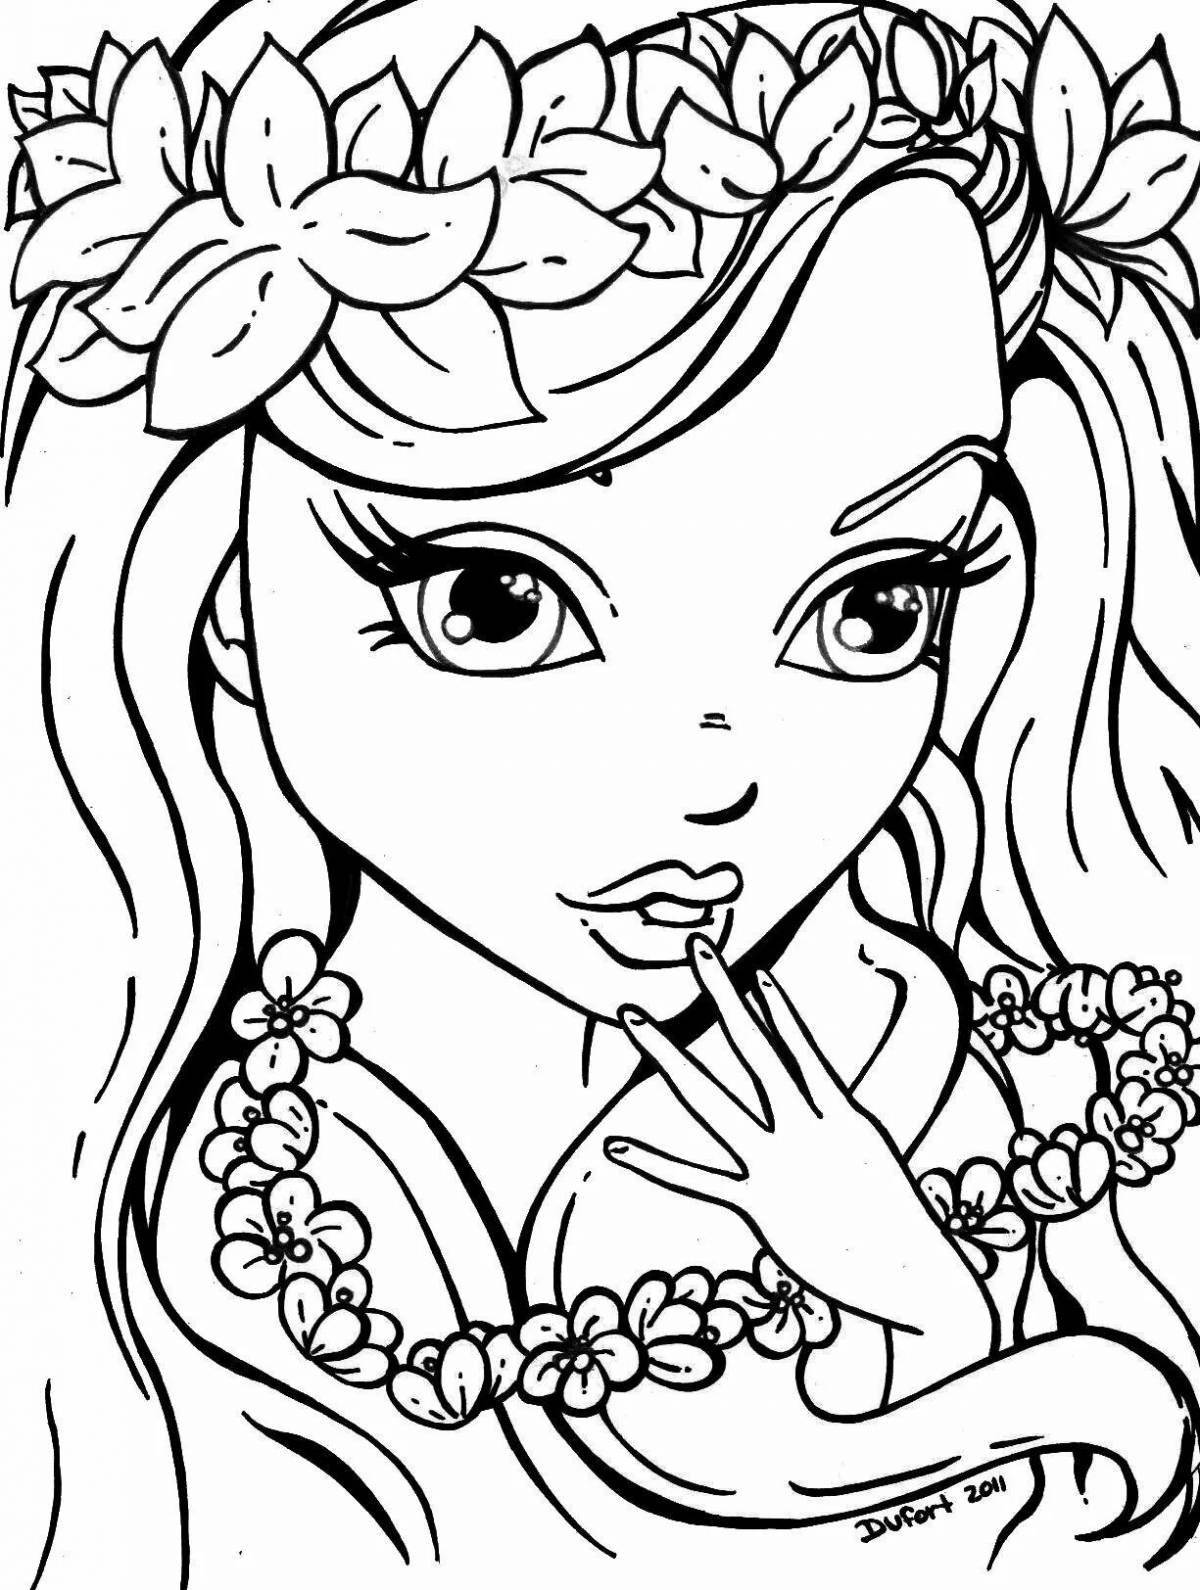 Radiant coloring page in e для девочек